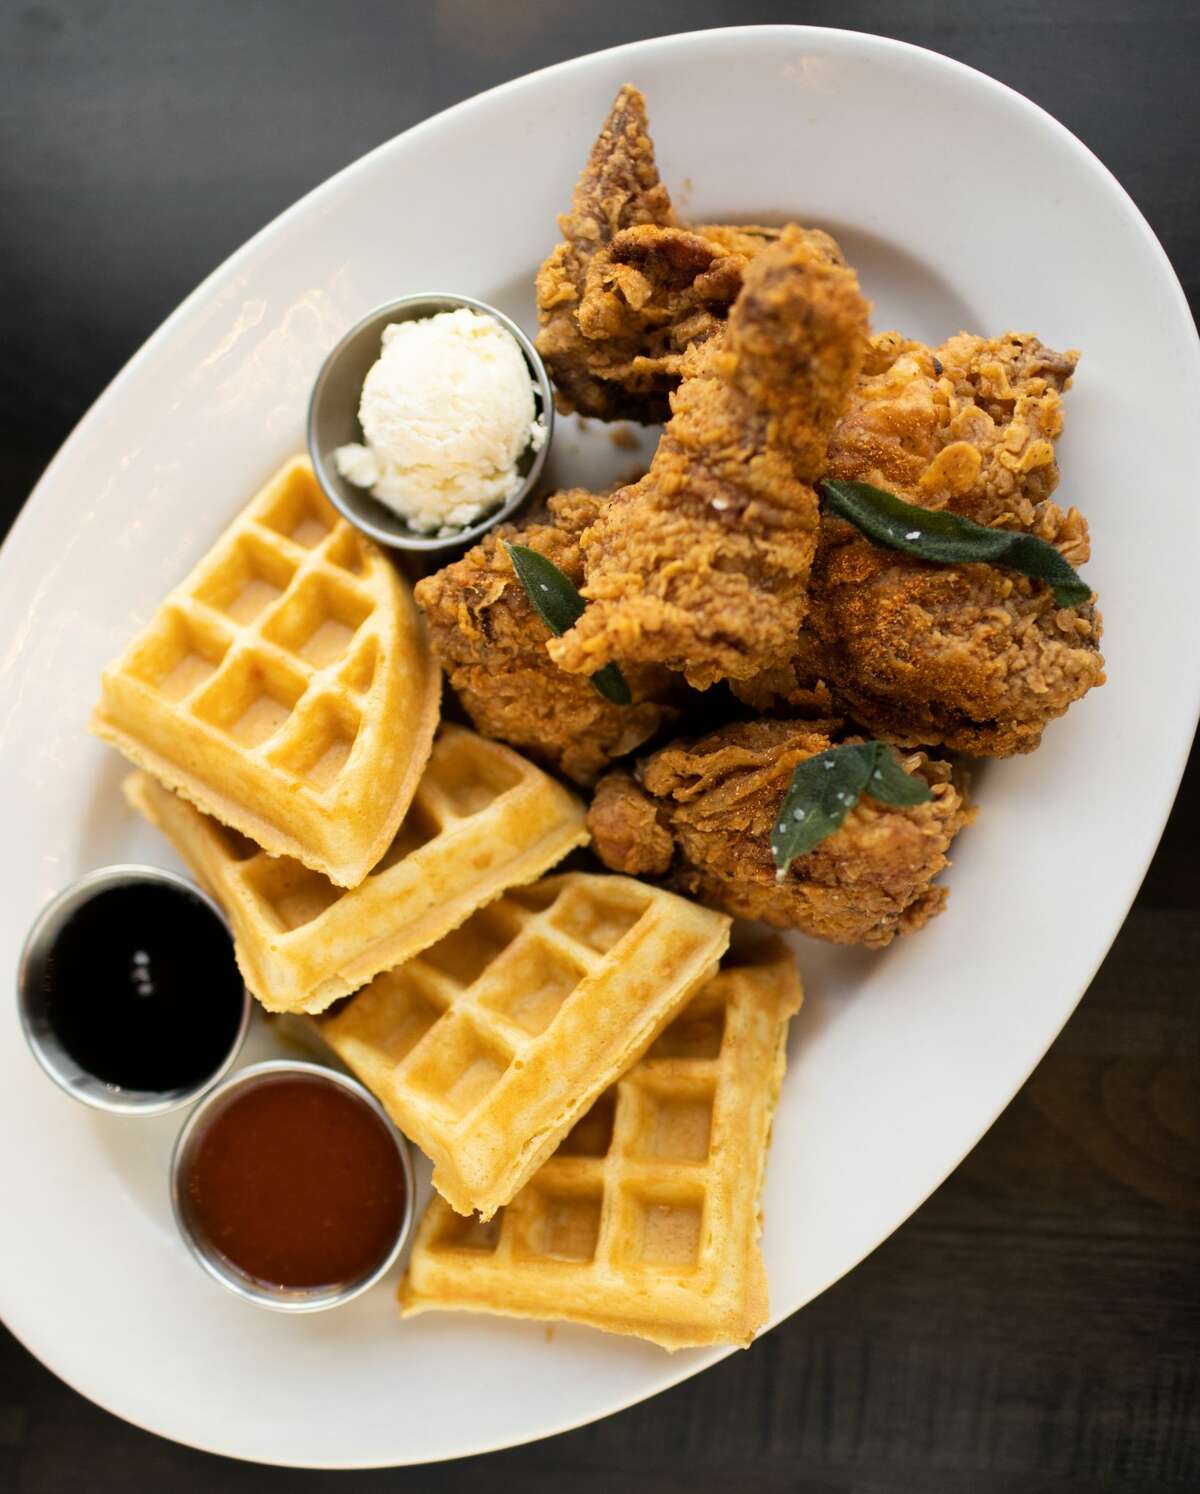 Chicken and waffles at The Nest in Schenectady, a sibling of The Cuckoo's Nest in Albany. (Elario Photography for The Nest.)